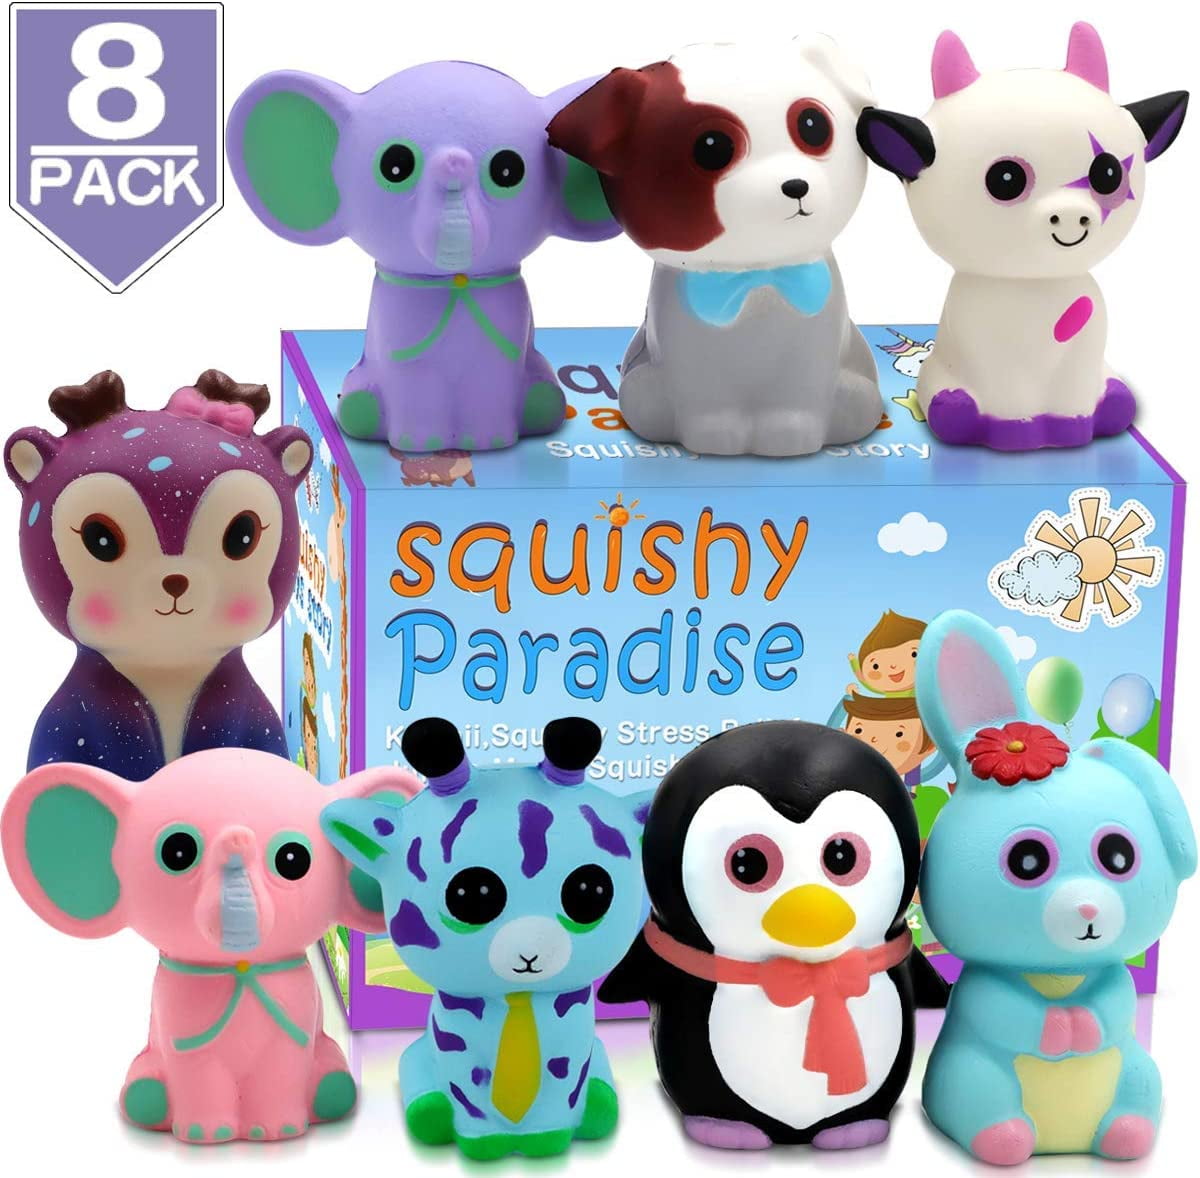 JOYIN 3 Pack Jumbo Galaxy Design Squishy Slow Rising Fantasy Animal Toy Slow Rising Stress Relief Soft Squeeze Kawaii Animal Friends Toys for Boys and Girls 